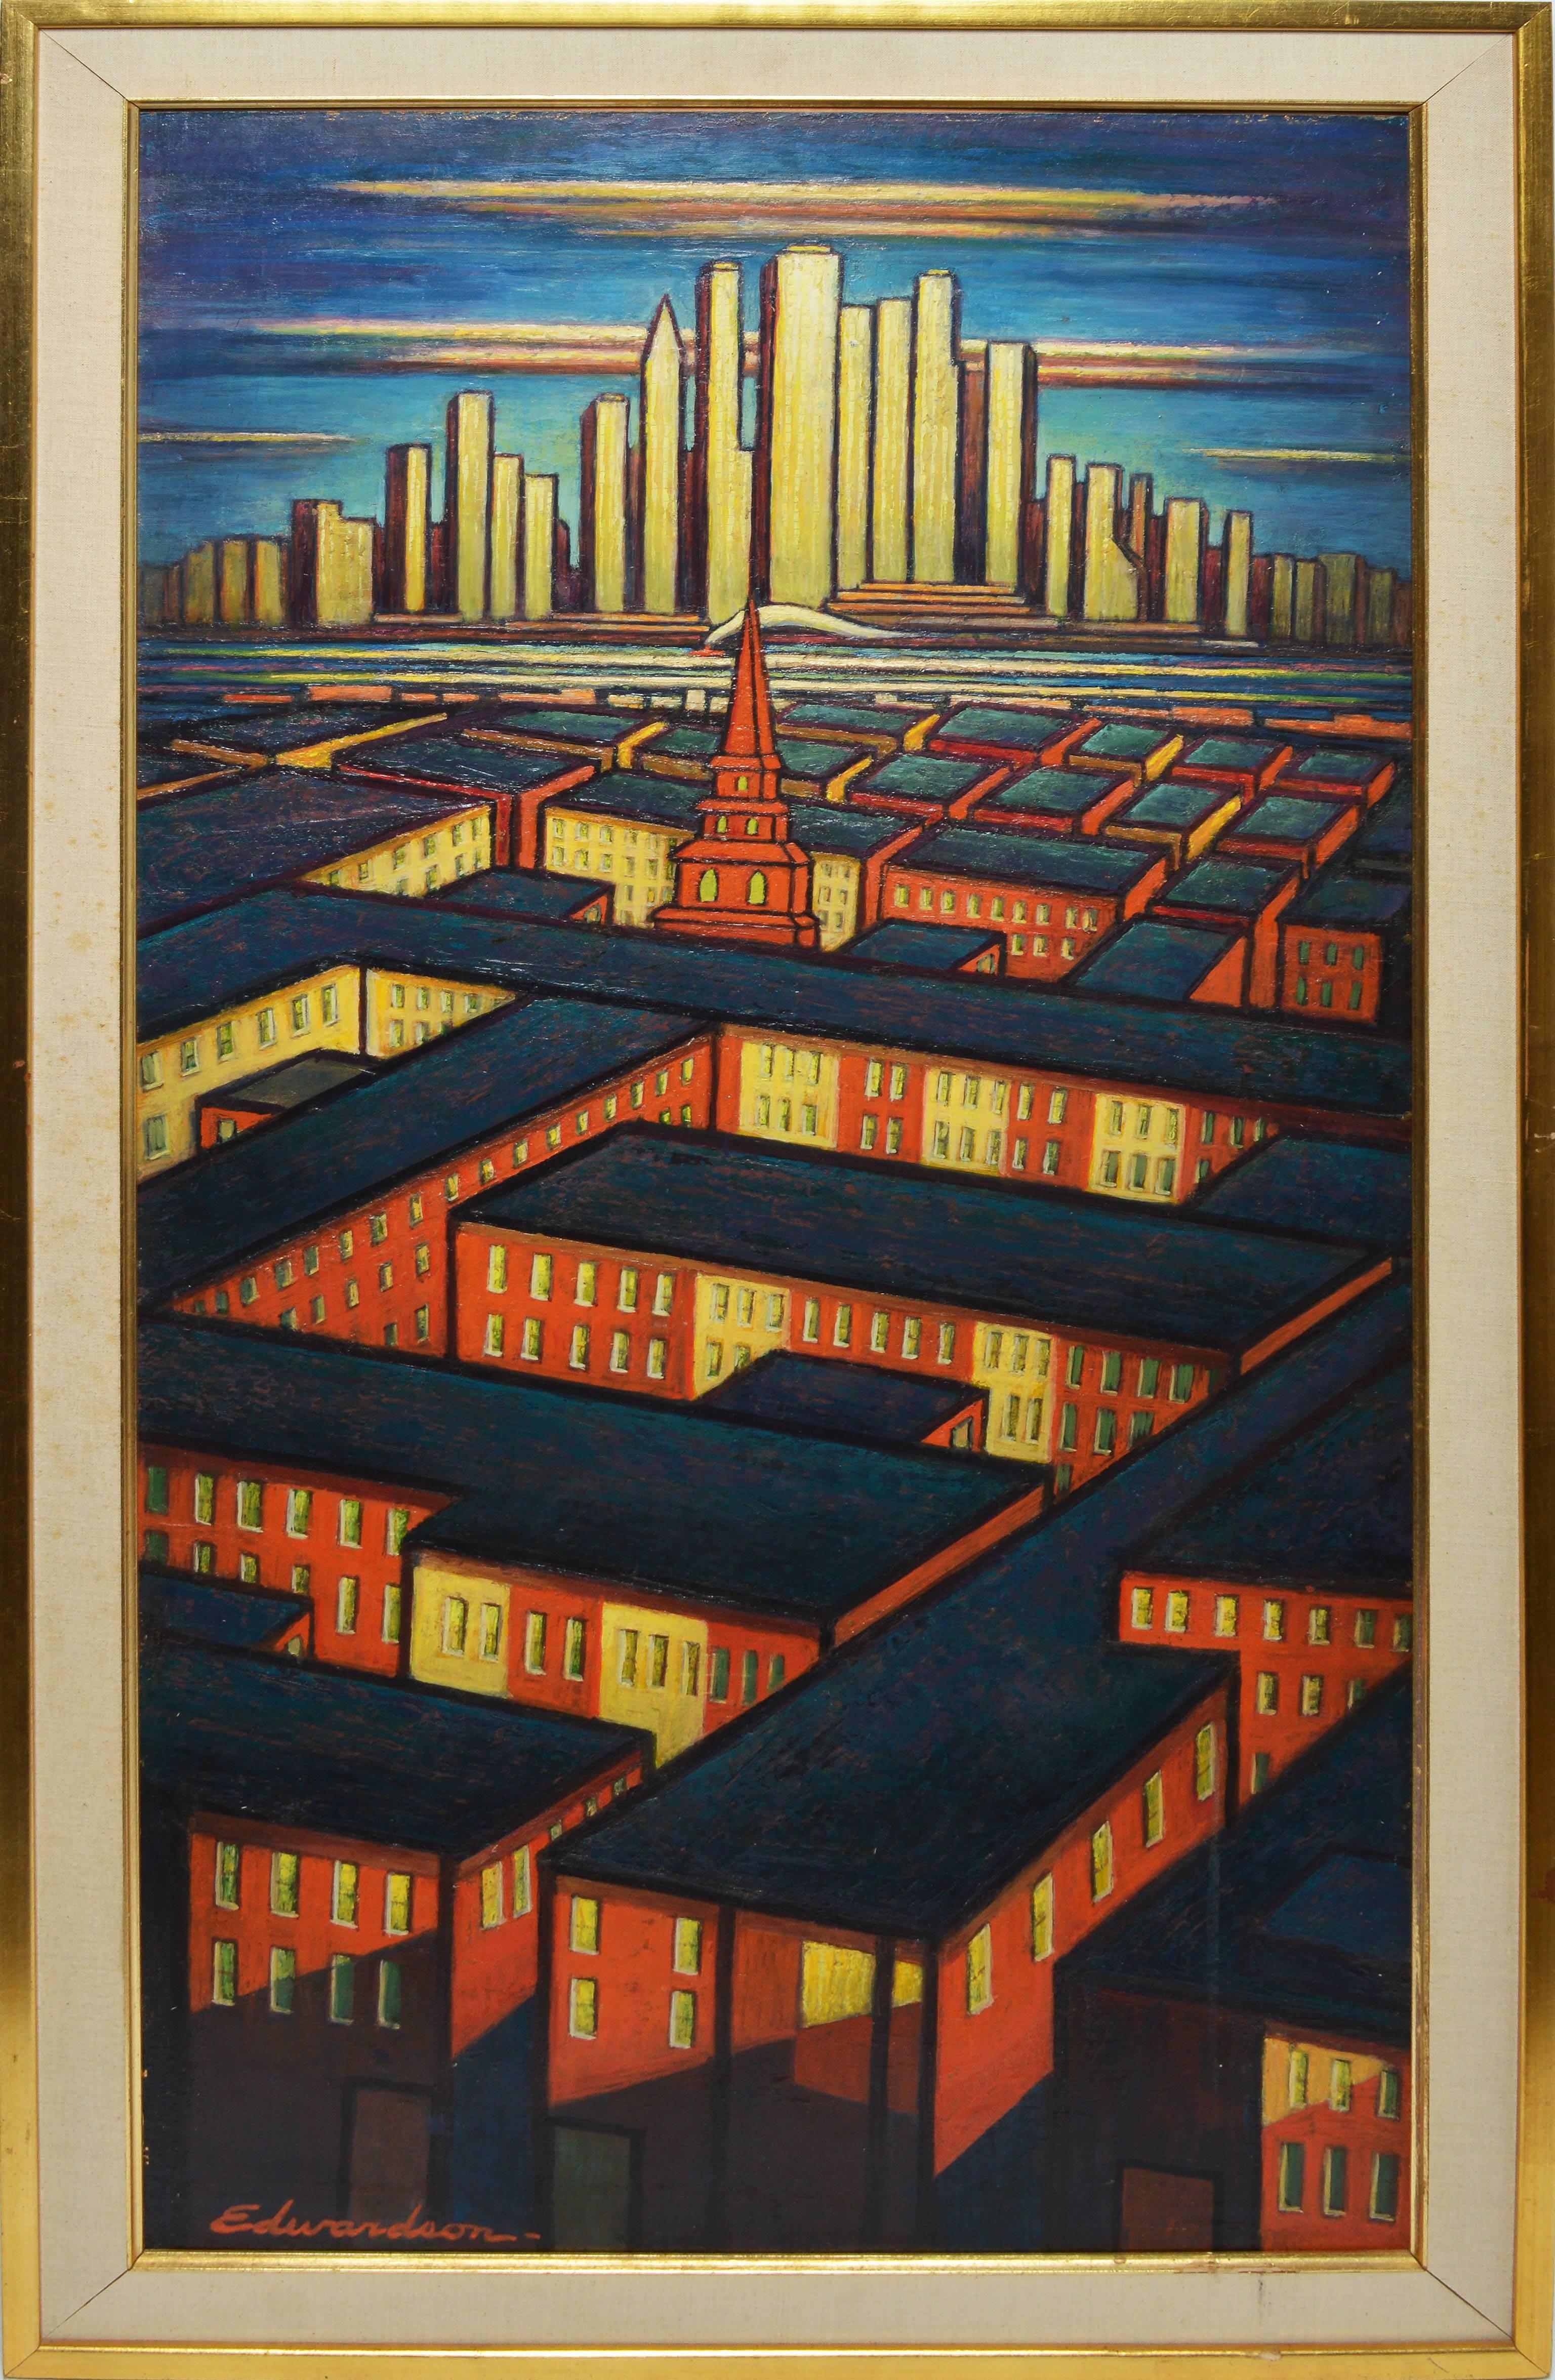 Modernist view of New York city by Laurence Edwardson  (1904 - 1995).  Oil on board, circa 1950.  Signed lower left, "Edwardson".  Displayed in a modernist frame.  Image size, 18"L x 36"H, overall 21.5"L x 39.5"H.



Laurence Christie Edwardson was